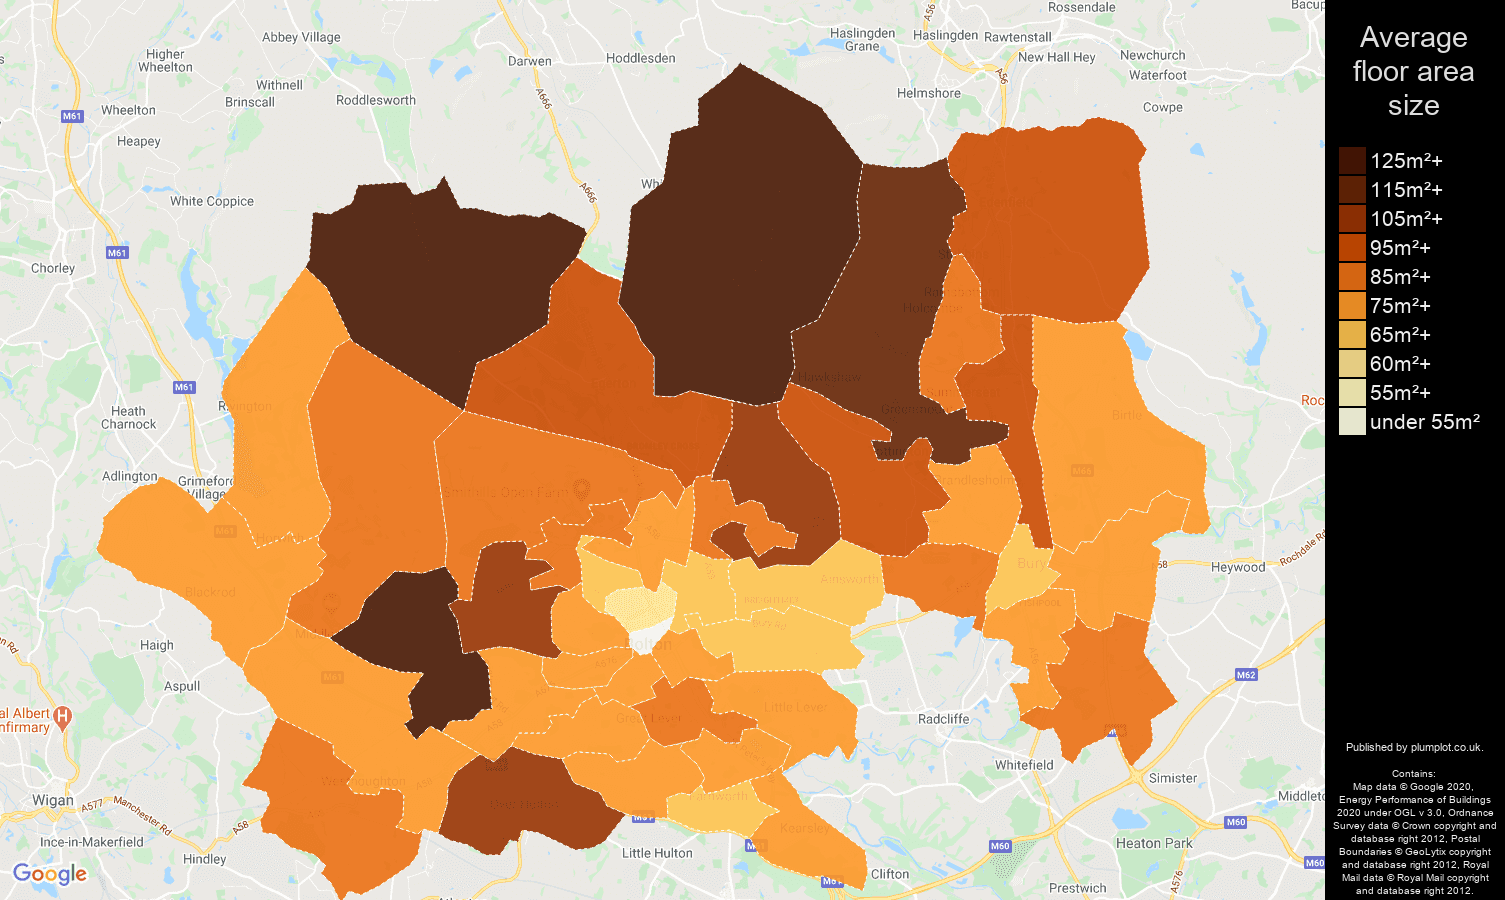 Bolton map of average floor area size of properties